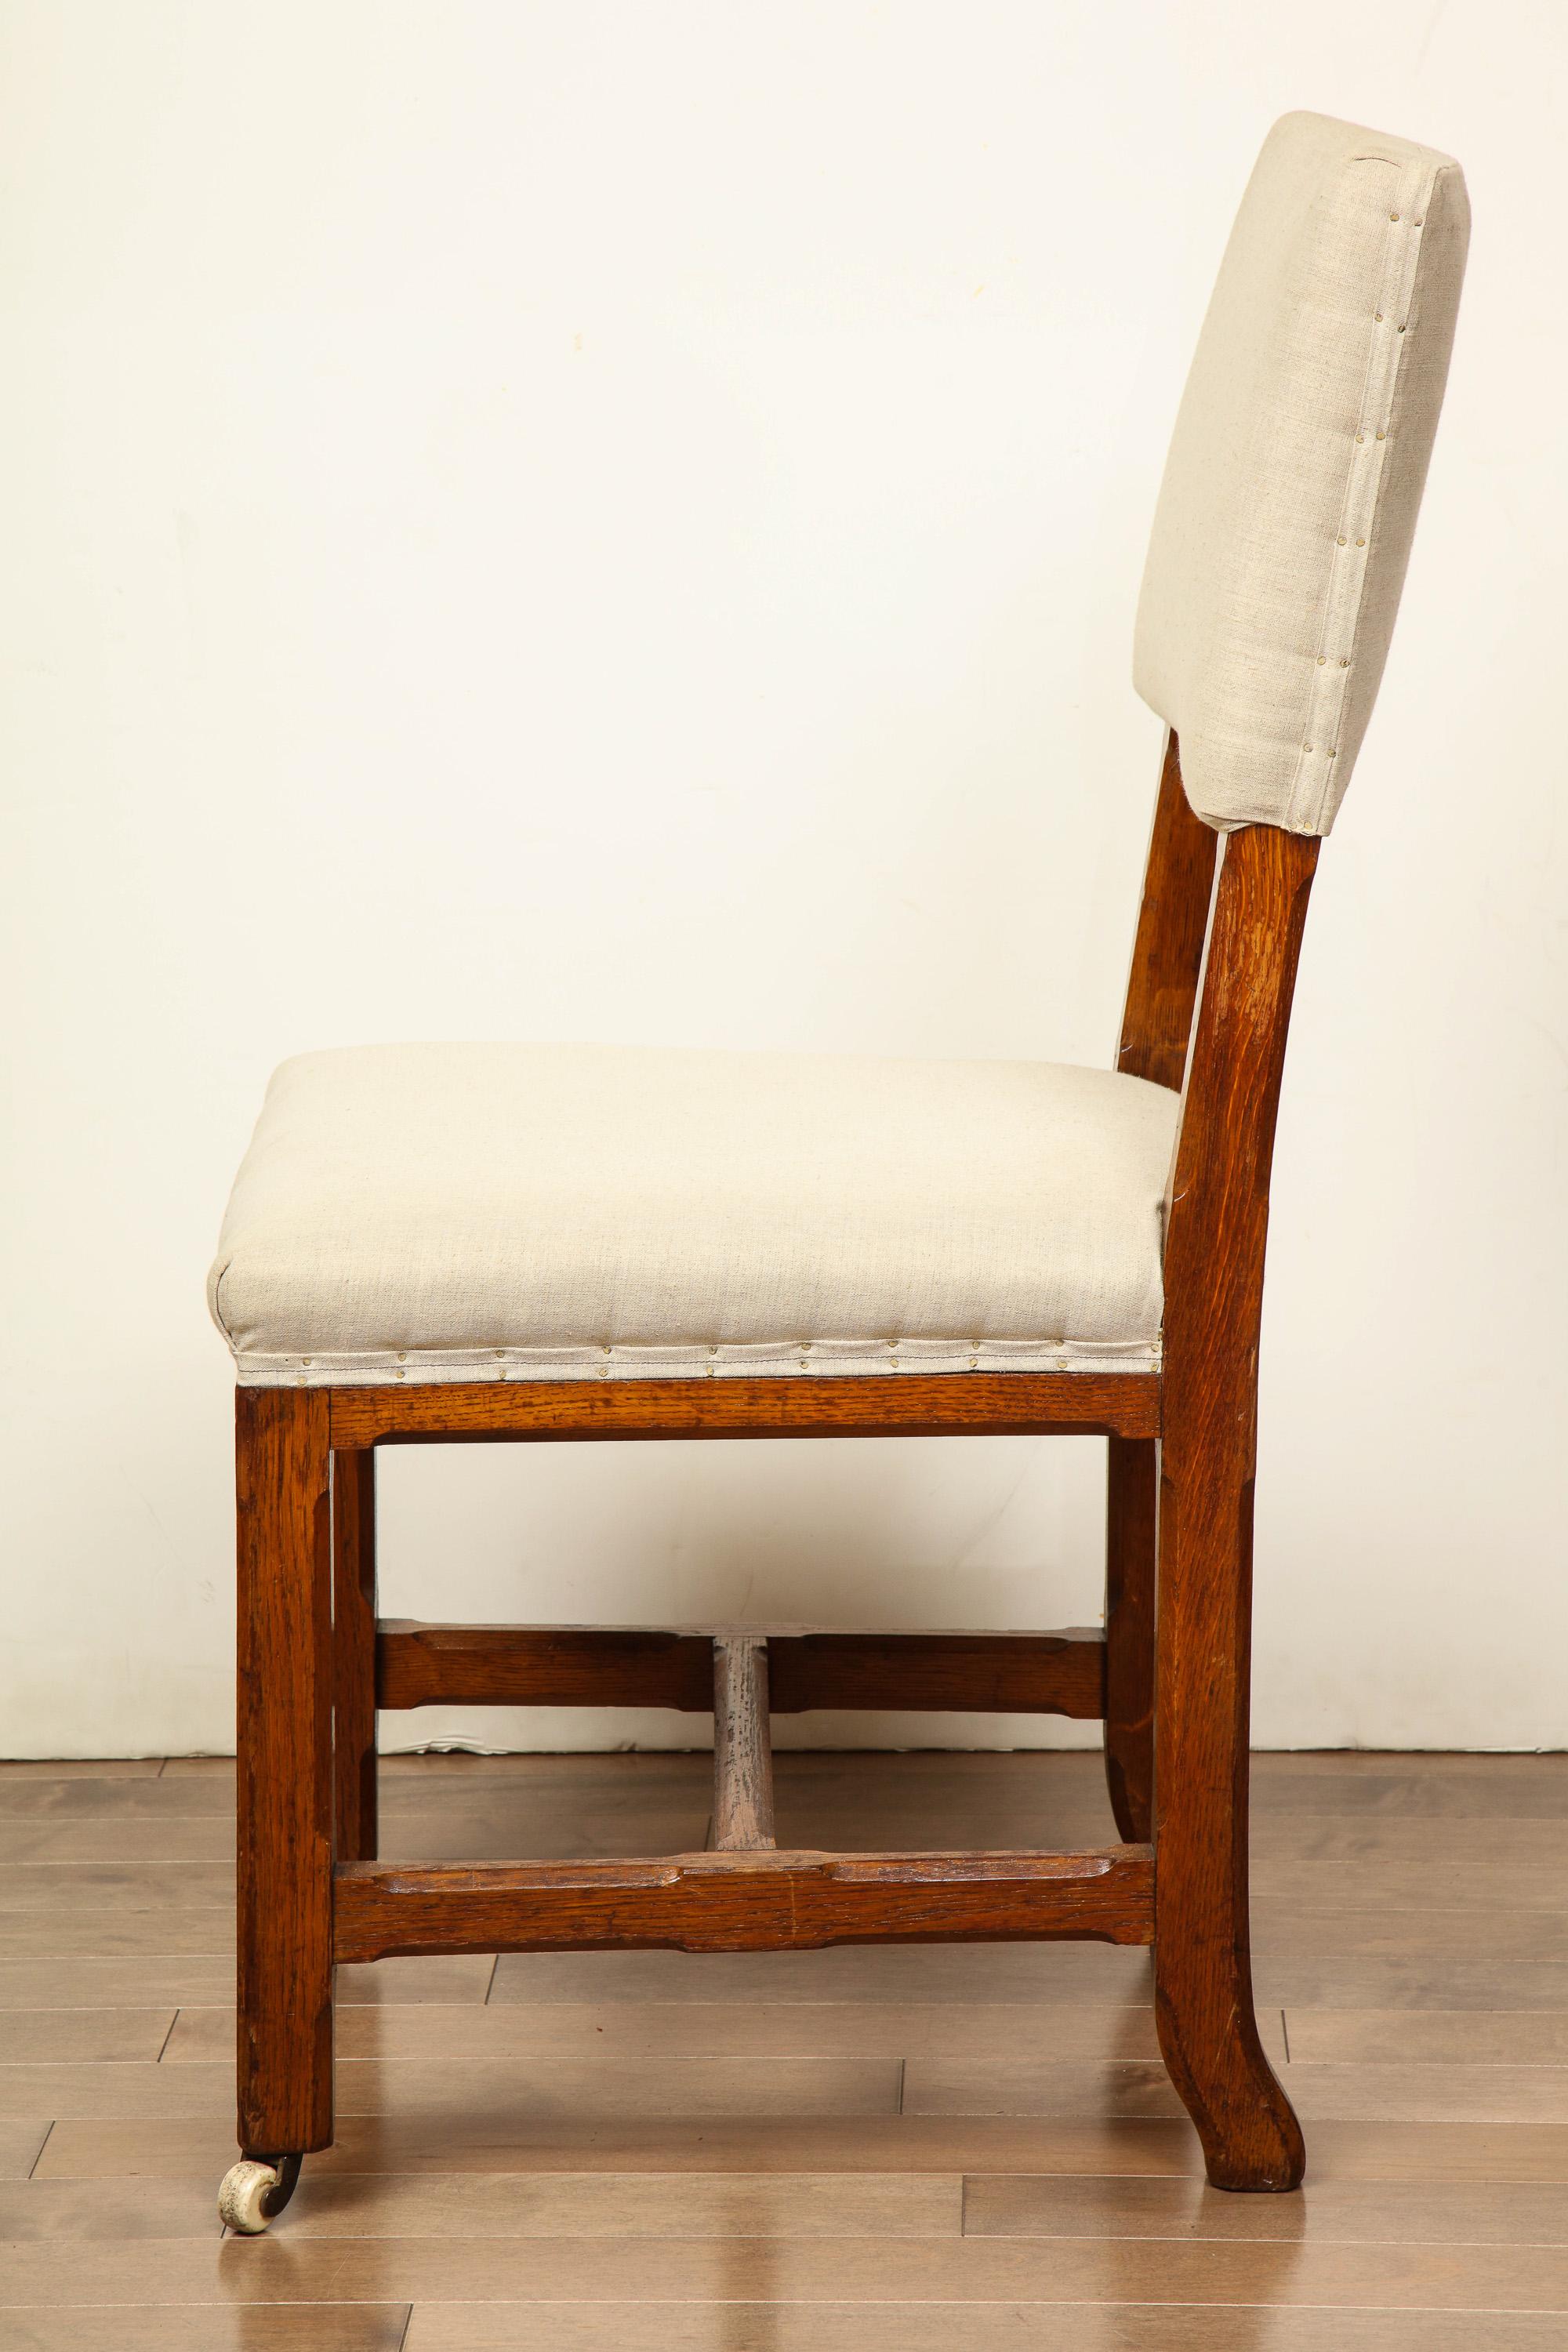 Mid-19th Century English Side Chair in the Manner of Pugin For Sale 3